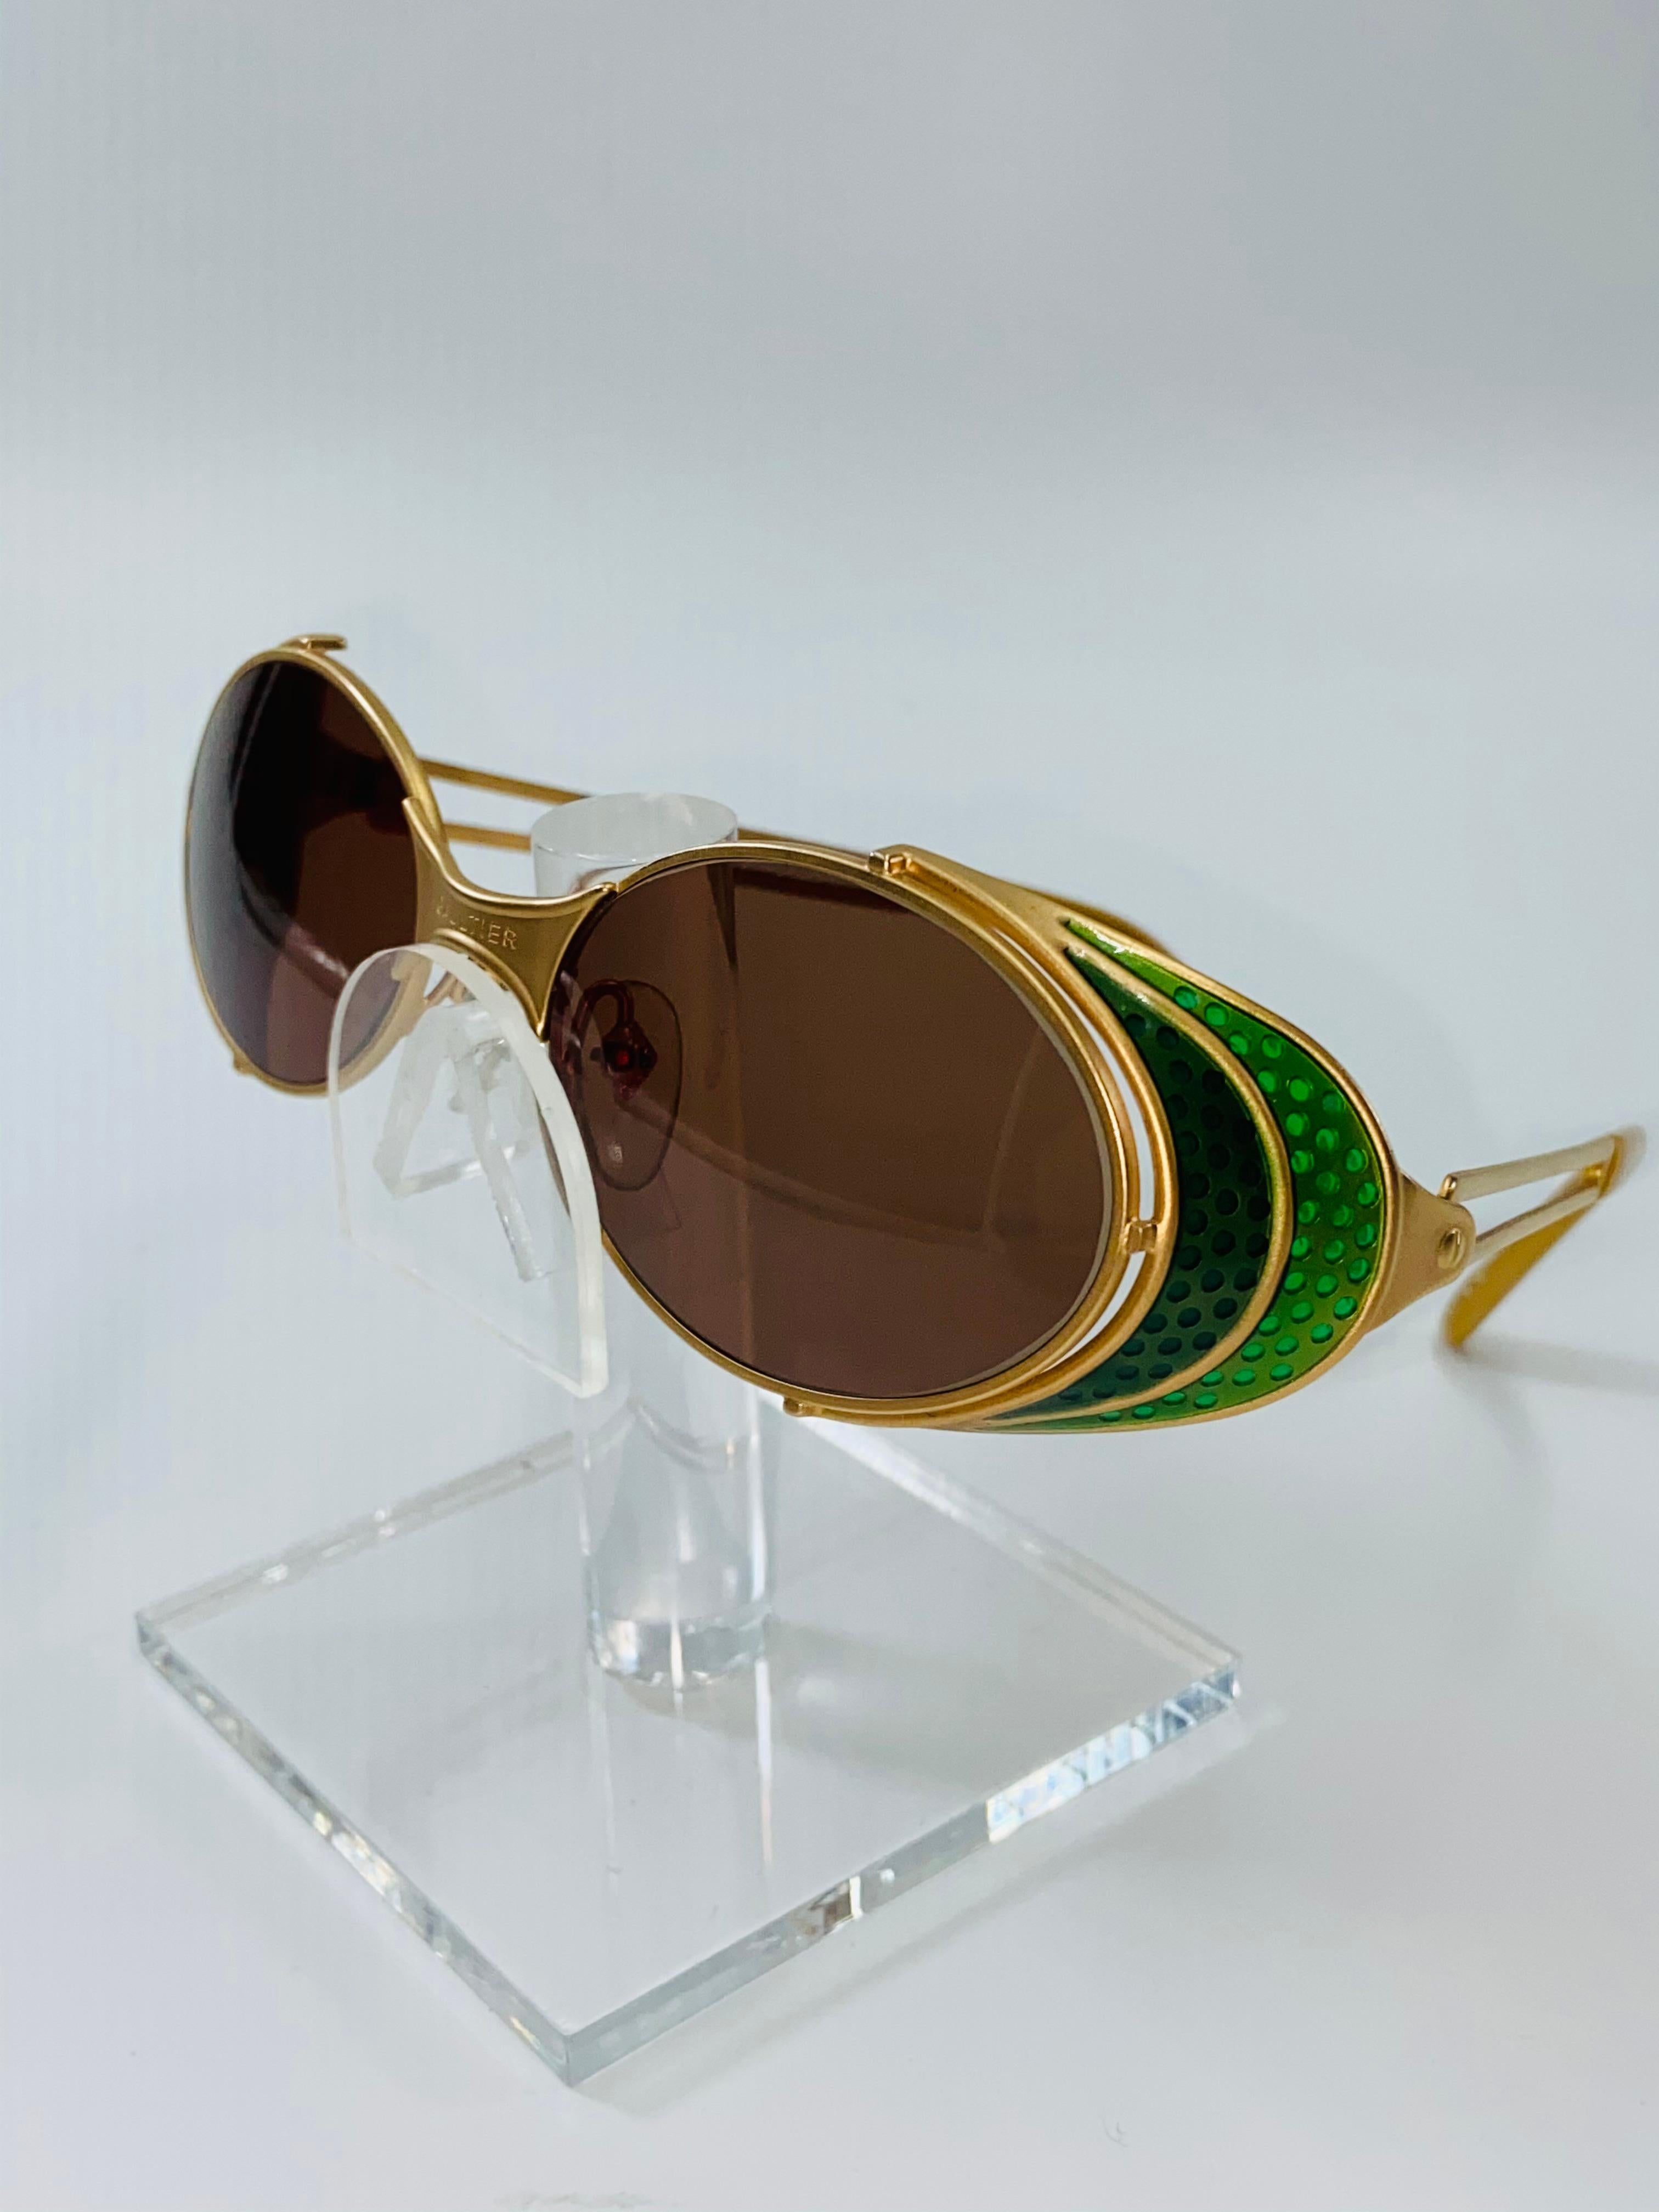 Jean Paul Gaultier Rare Vintage Green Enamel & Gold Steampunk Sunglasses
Matt Gold tone metal frame with two tone decorative green enamel detail on side of eyes
Gaultier stamped across the nose bridge 
Tinted lenses.

Max width 6 3/4 in.
Lenses